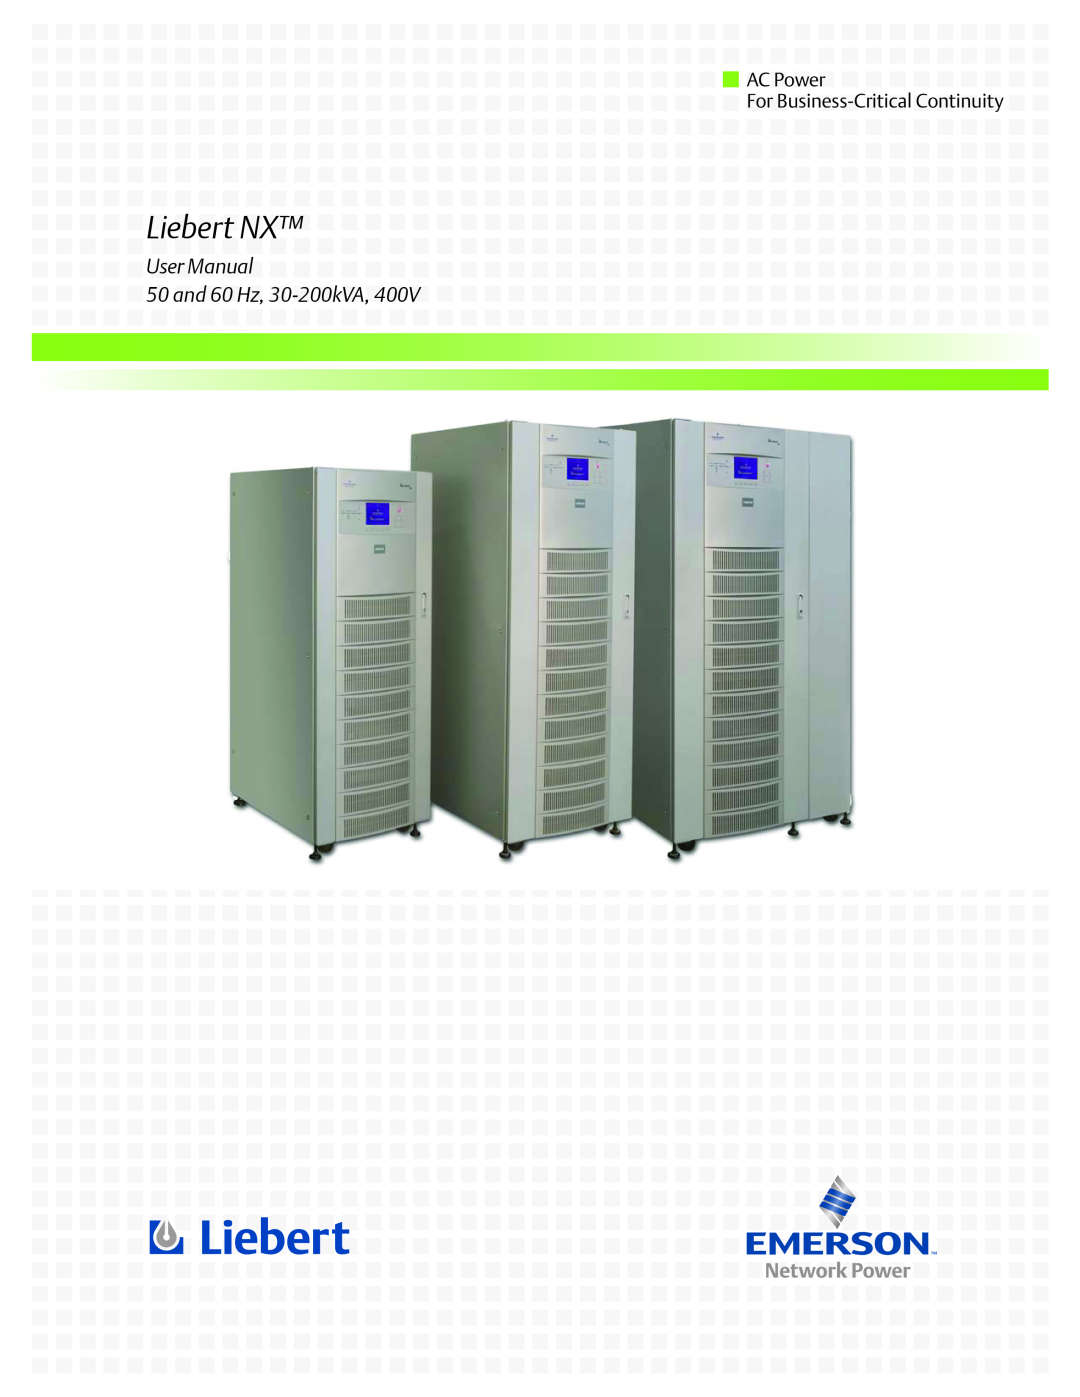 Emerson 400V user manual Liebert NX, AC Power For Business-Critical Continuity, User Manual 50 and 60 Hz, 30-200kVA 